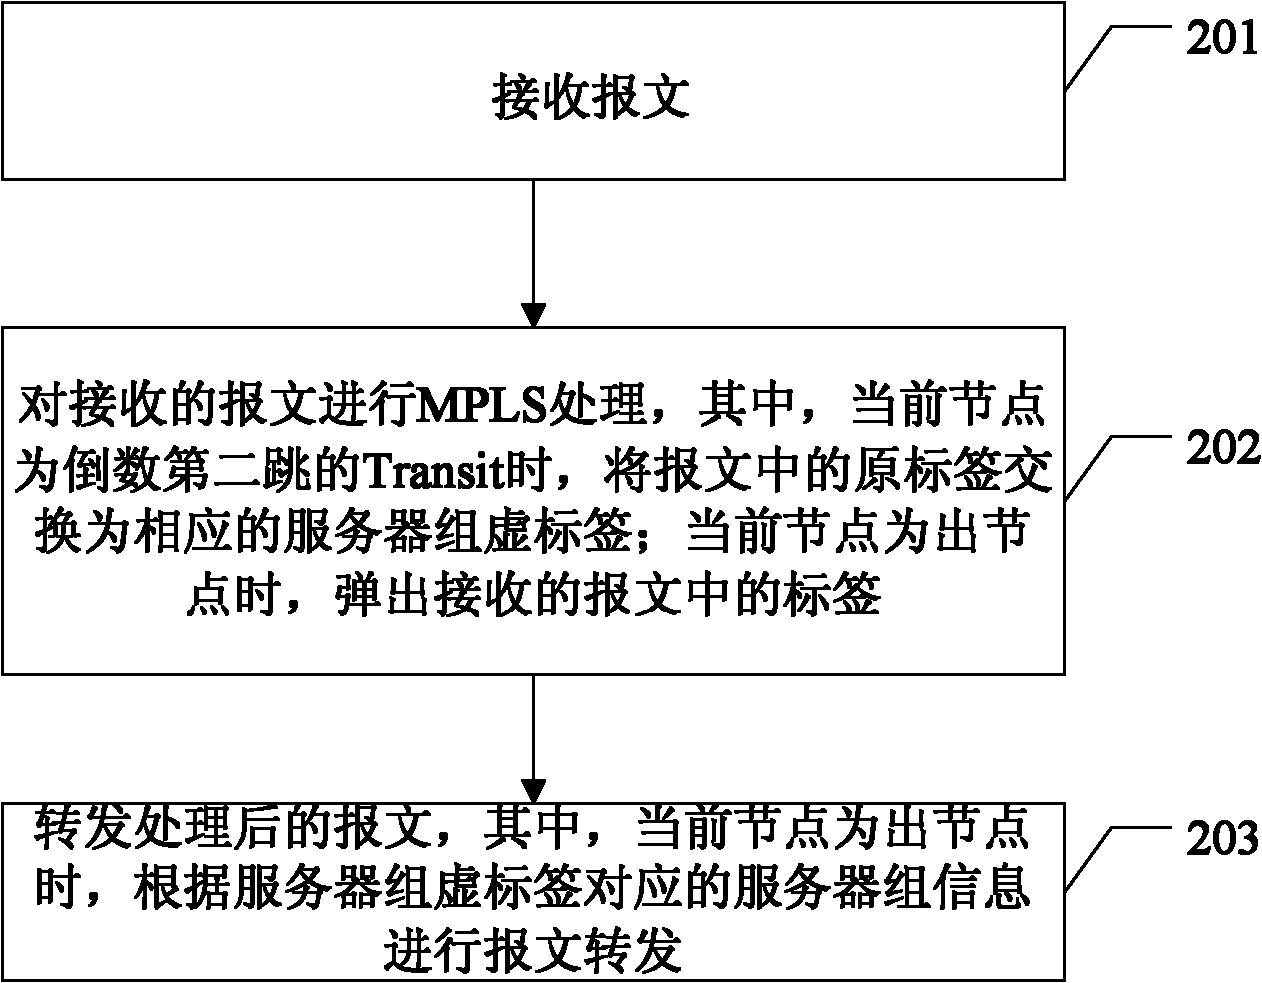 Application service message forwarding method and forwarding node adopting multi-protocol label switching (MPLS) technology